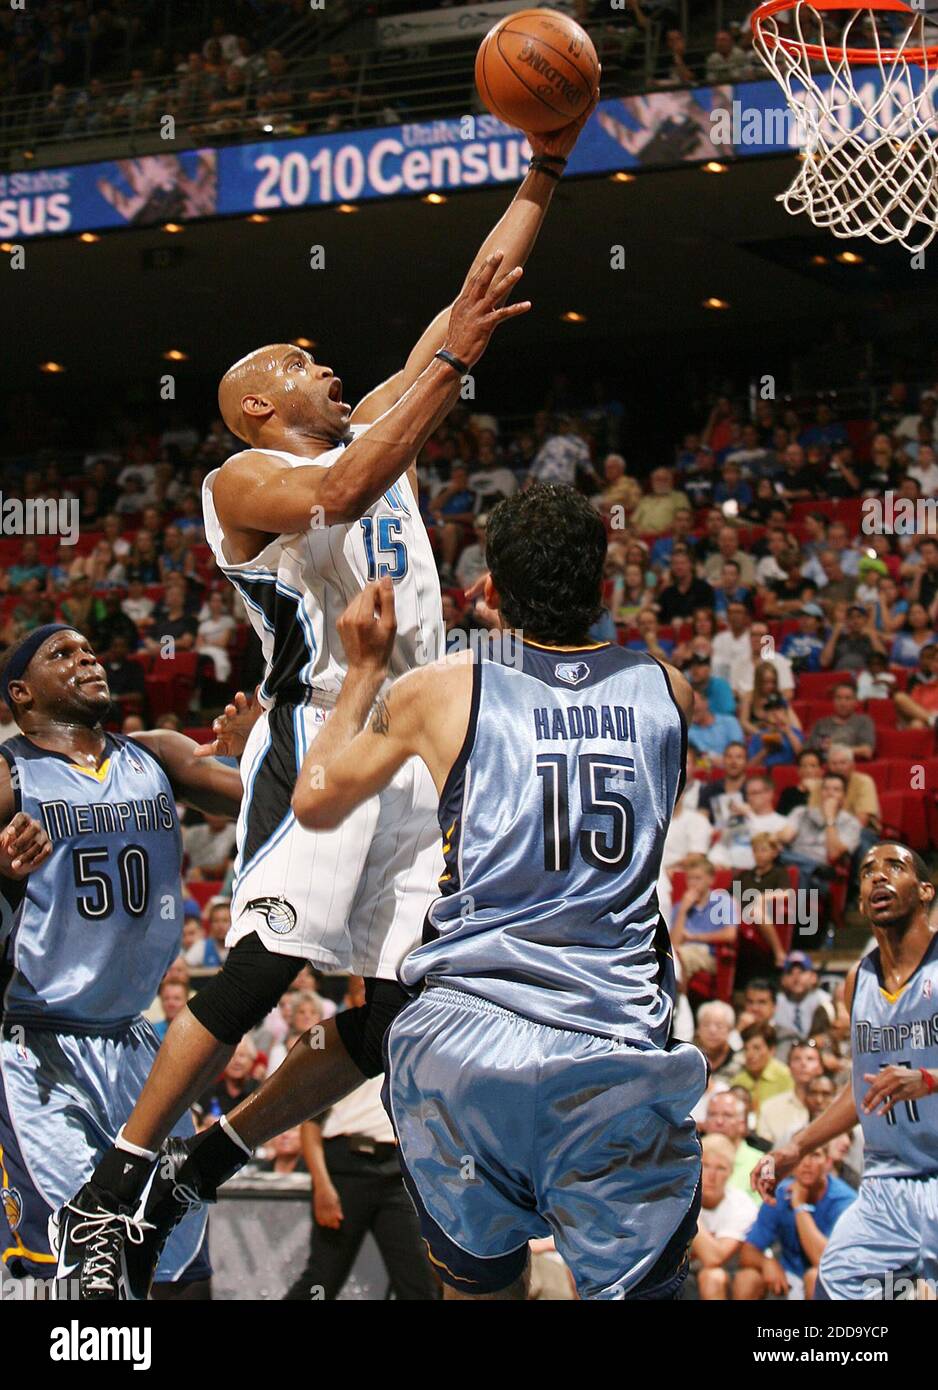 NO FILM, NO VIDEO, NO TV, NO DOCUMENTARY - Orlando Magic guard Vince Carter scores over Memphis Grizzlies center Hamed Haddadi and forward Zach Randolph (50) during an NBA game at Amway Arena in Orlando, FL, USA on April 4, 2010. Photo by Stephen M. Dowell/Orlando Sentinel/MCT/Cameleon/ABACAPRESS.COM Stock Photo